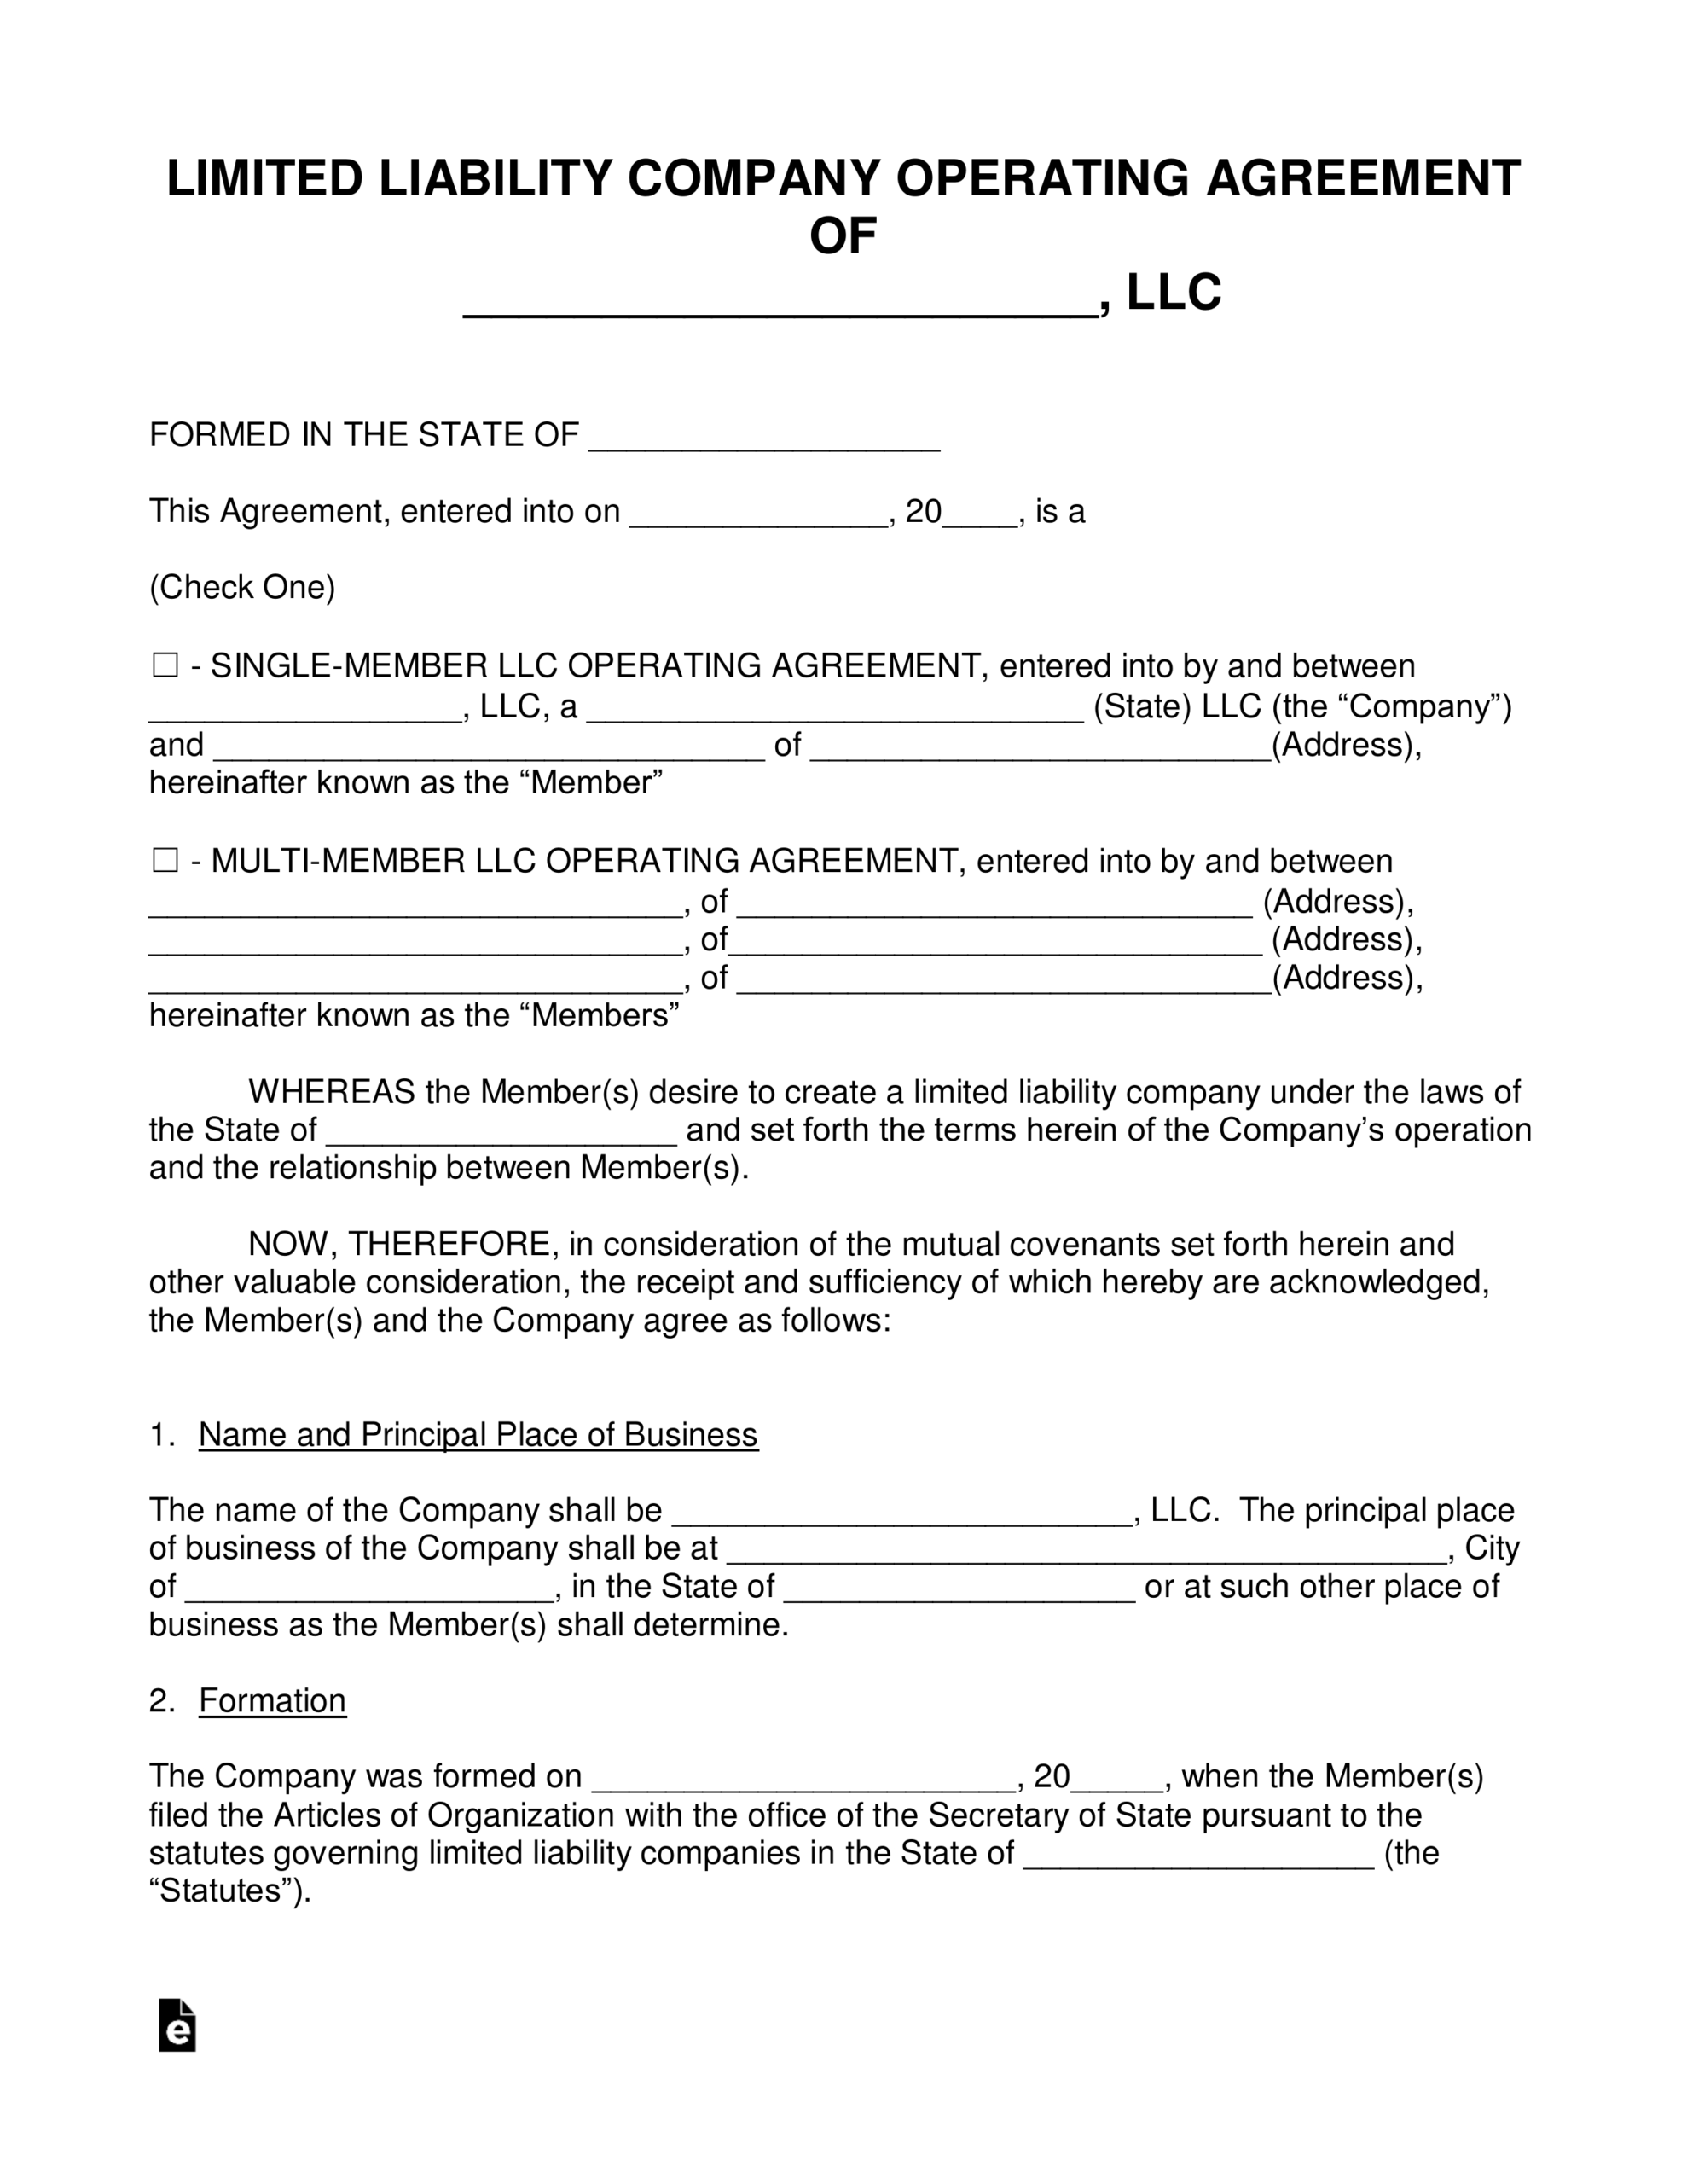 Free Llc Operating Agreement Templates – Pdf | Word | Eforms In Llc Articles Of Organization Template